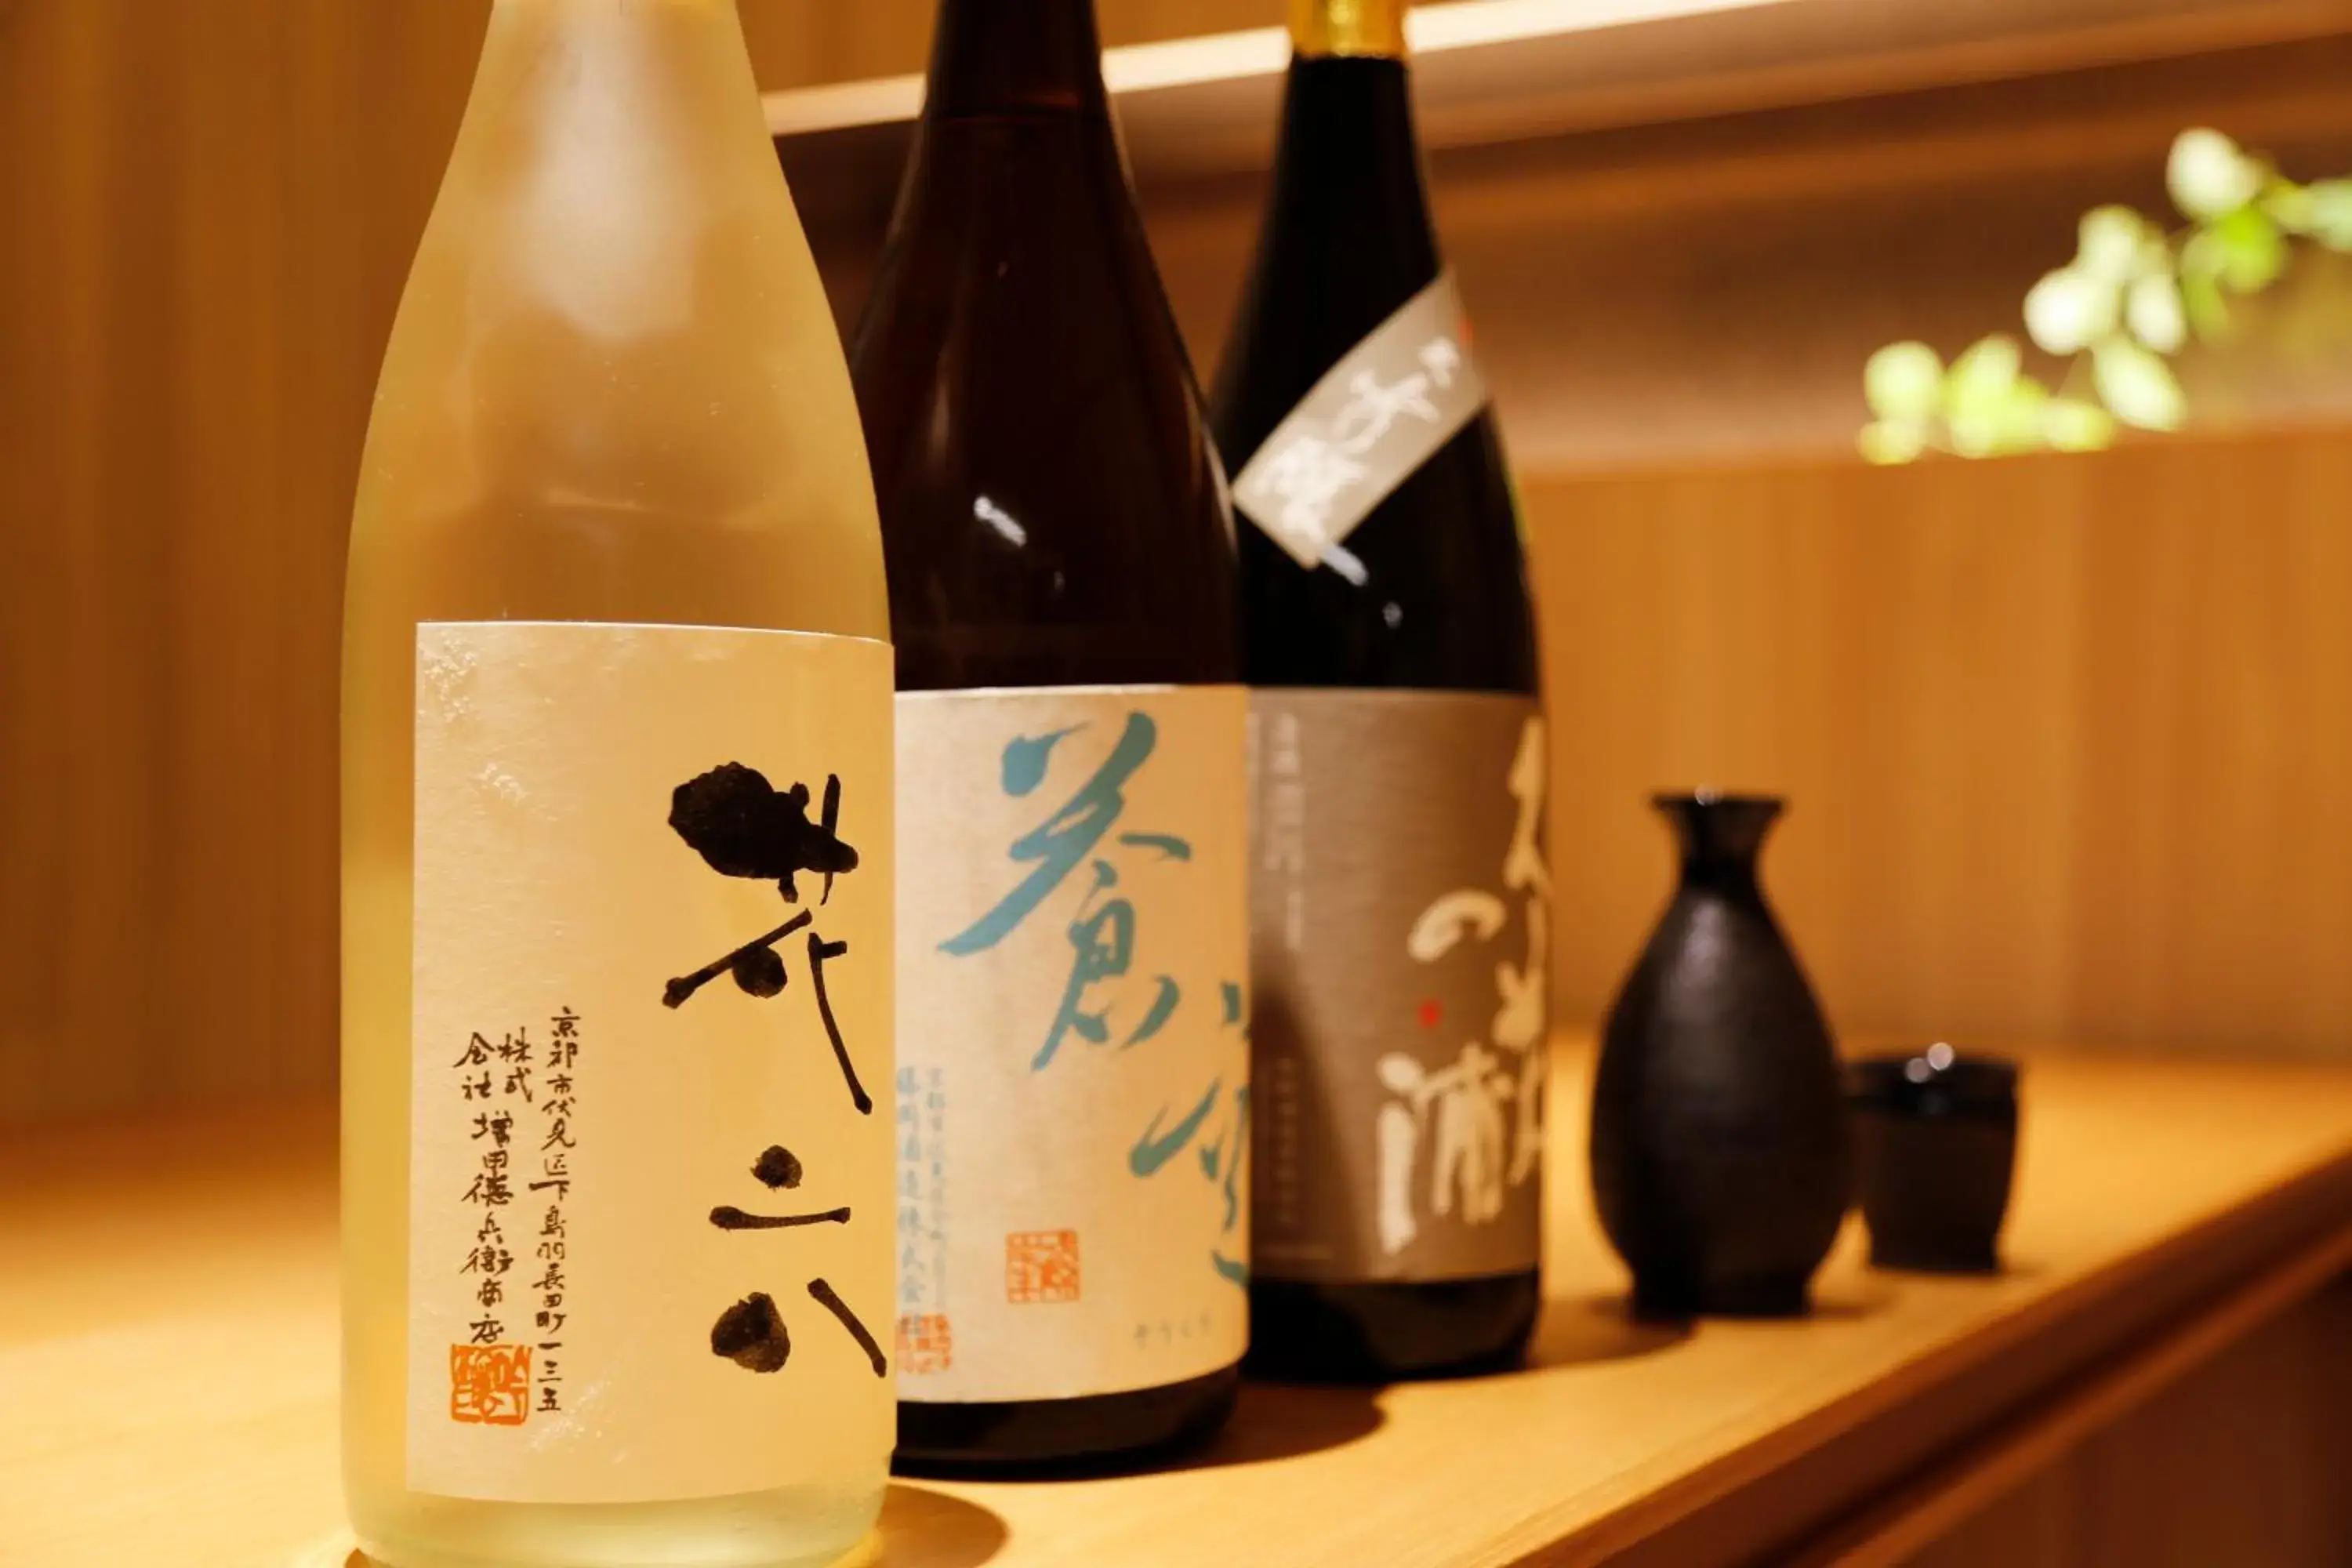 Alcoholic drinks, Drinks in hotel kanra kyoto